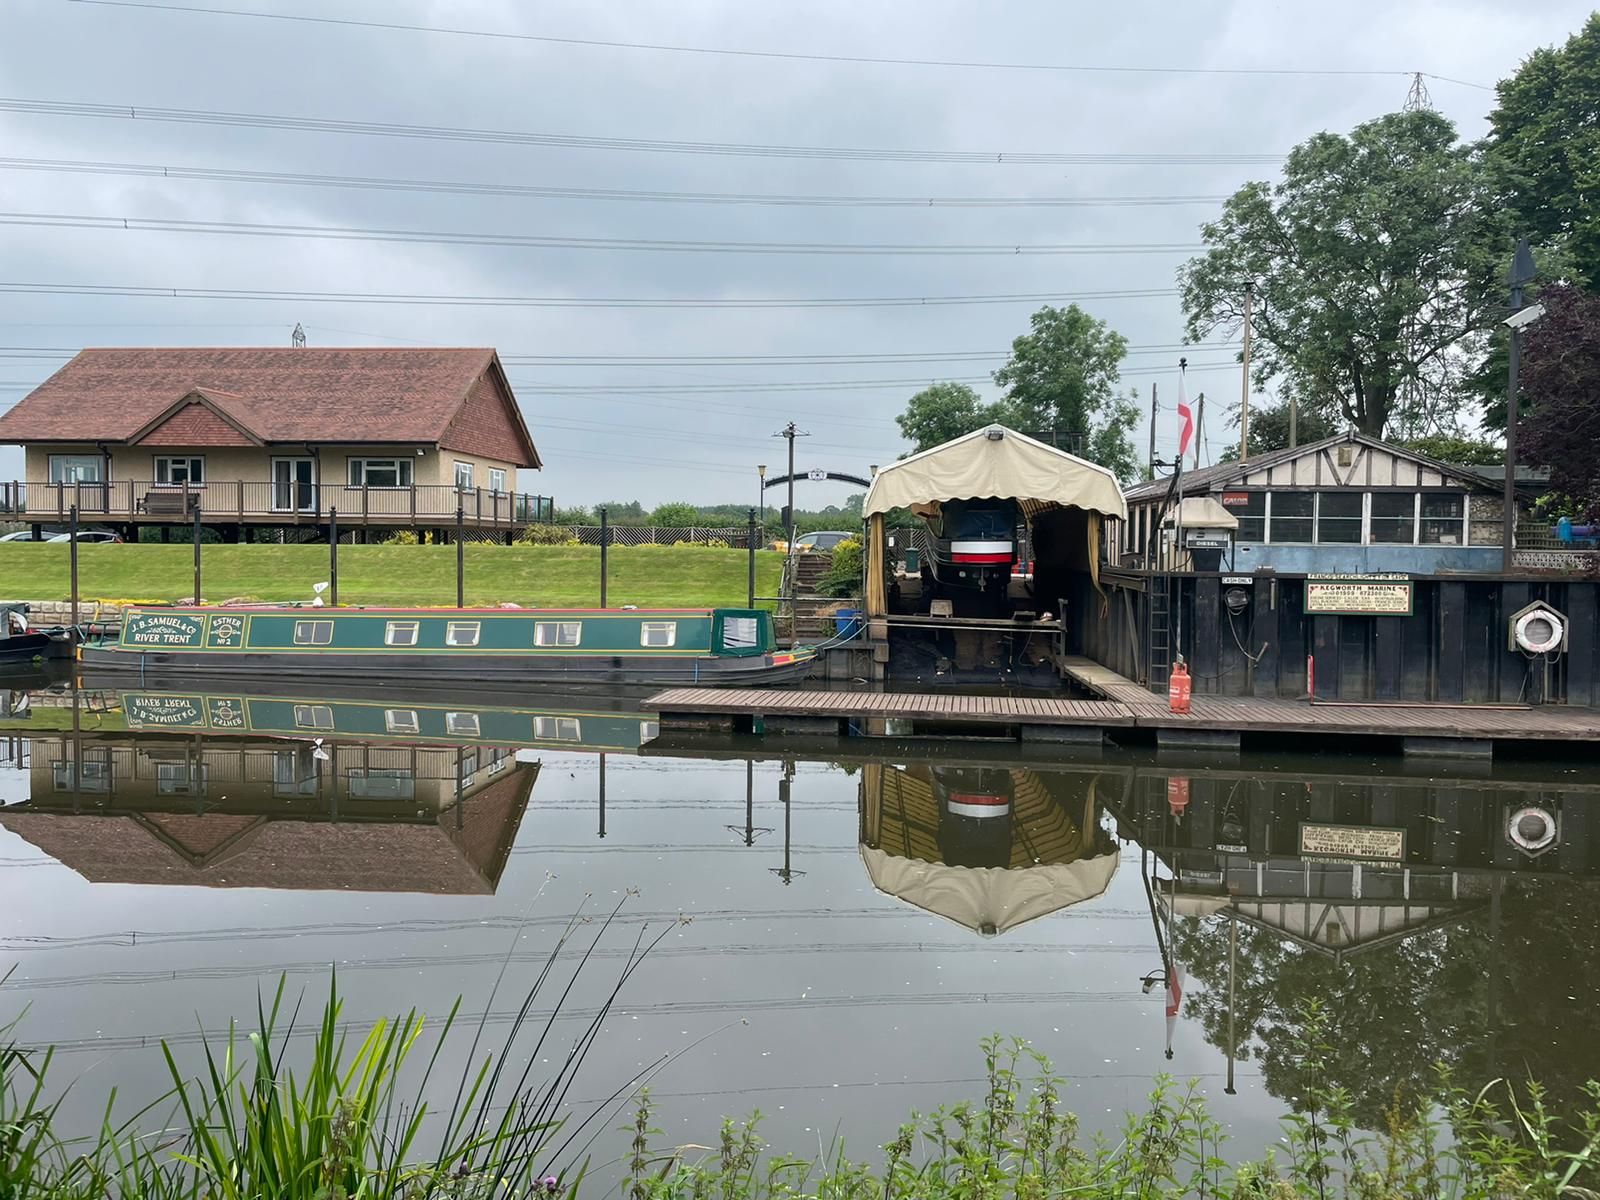 Kegworth marina and some narrow boats viewed across the canal